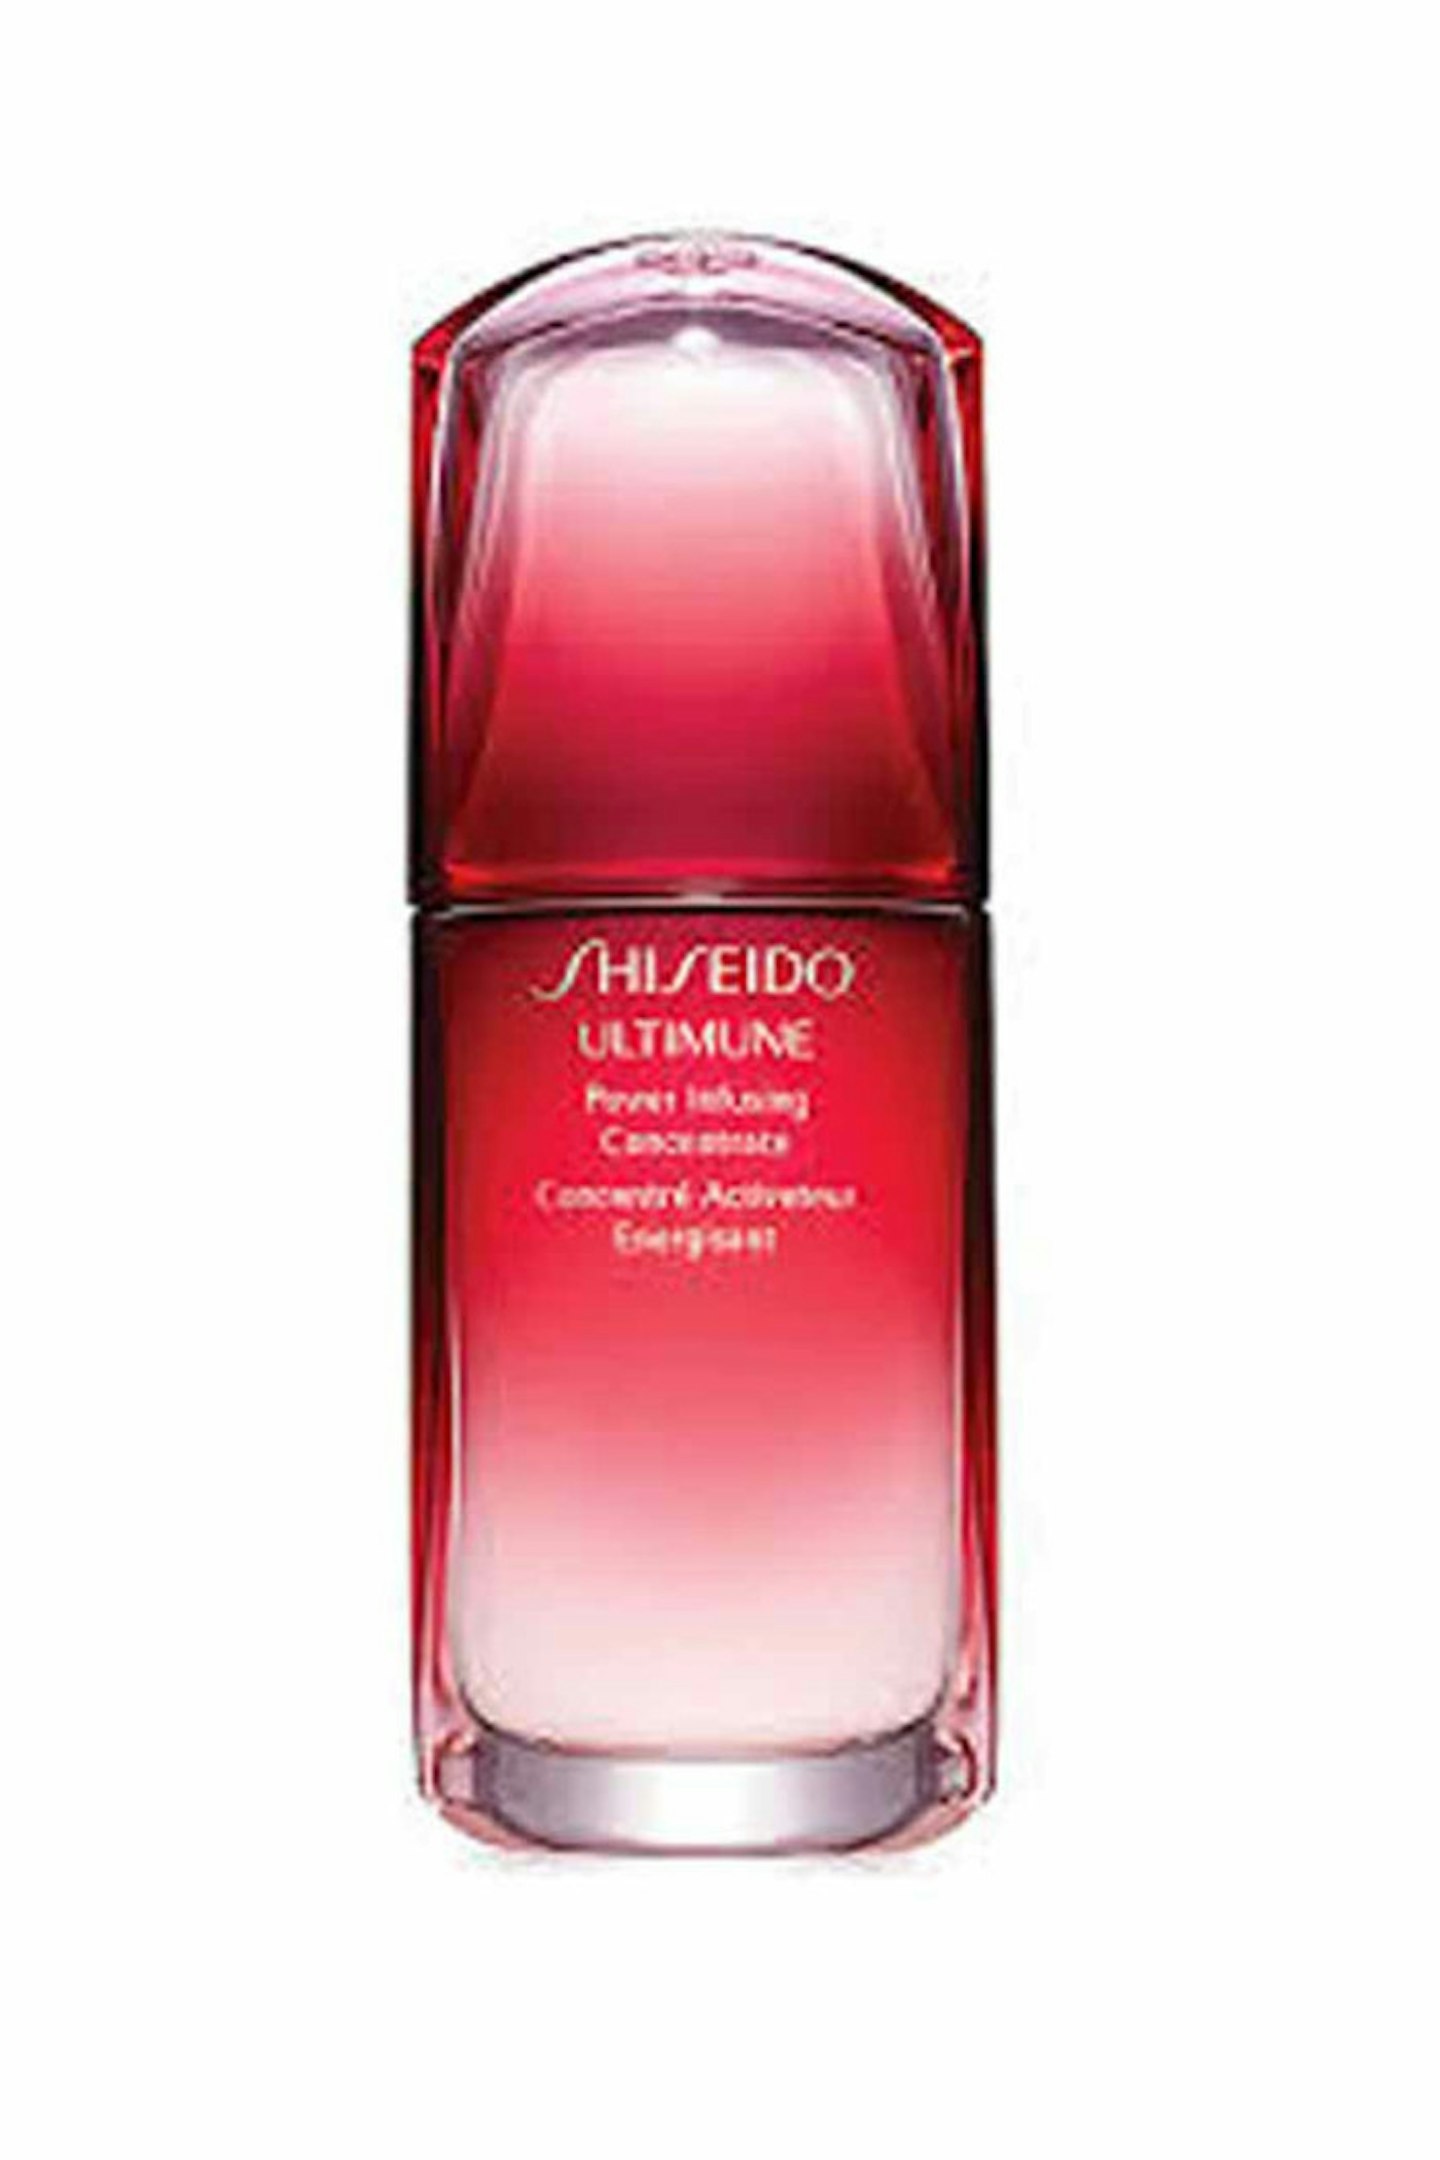 5. Shiseido Ultimune Power Infusing Concentrate, £60